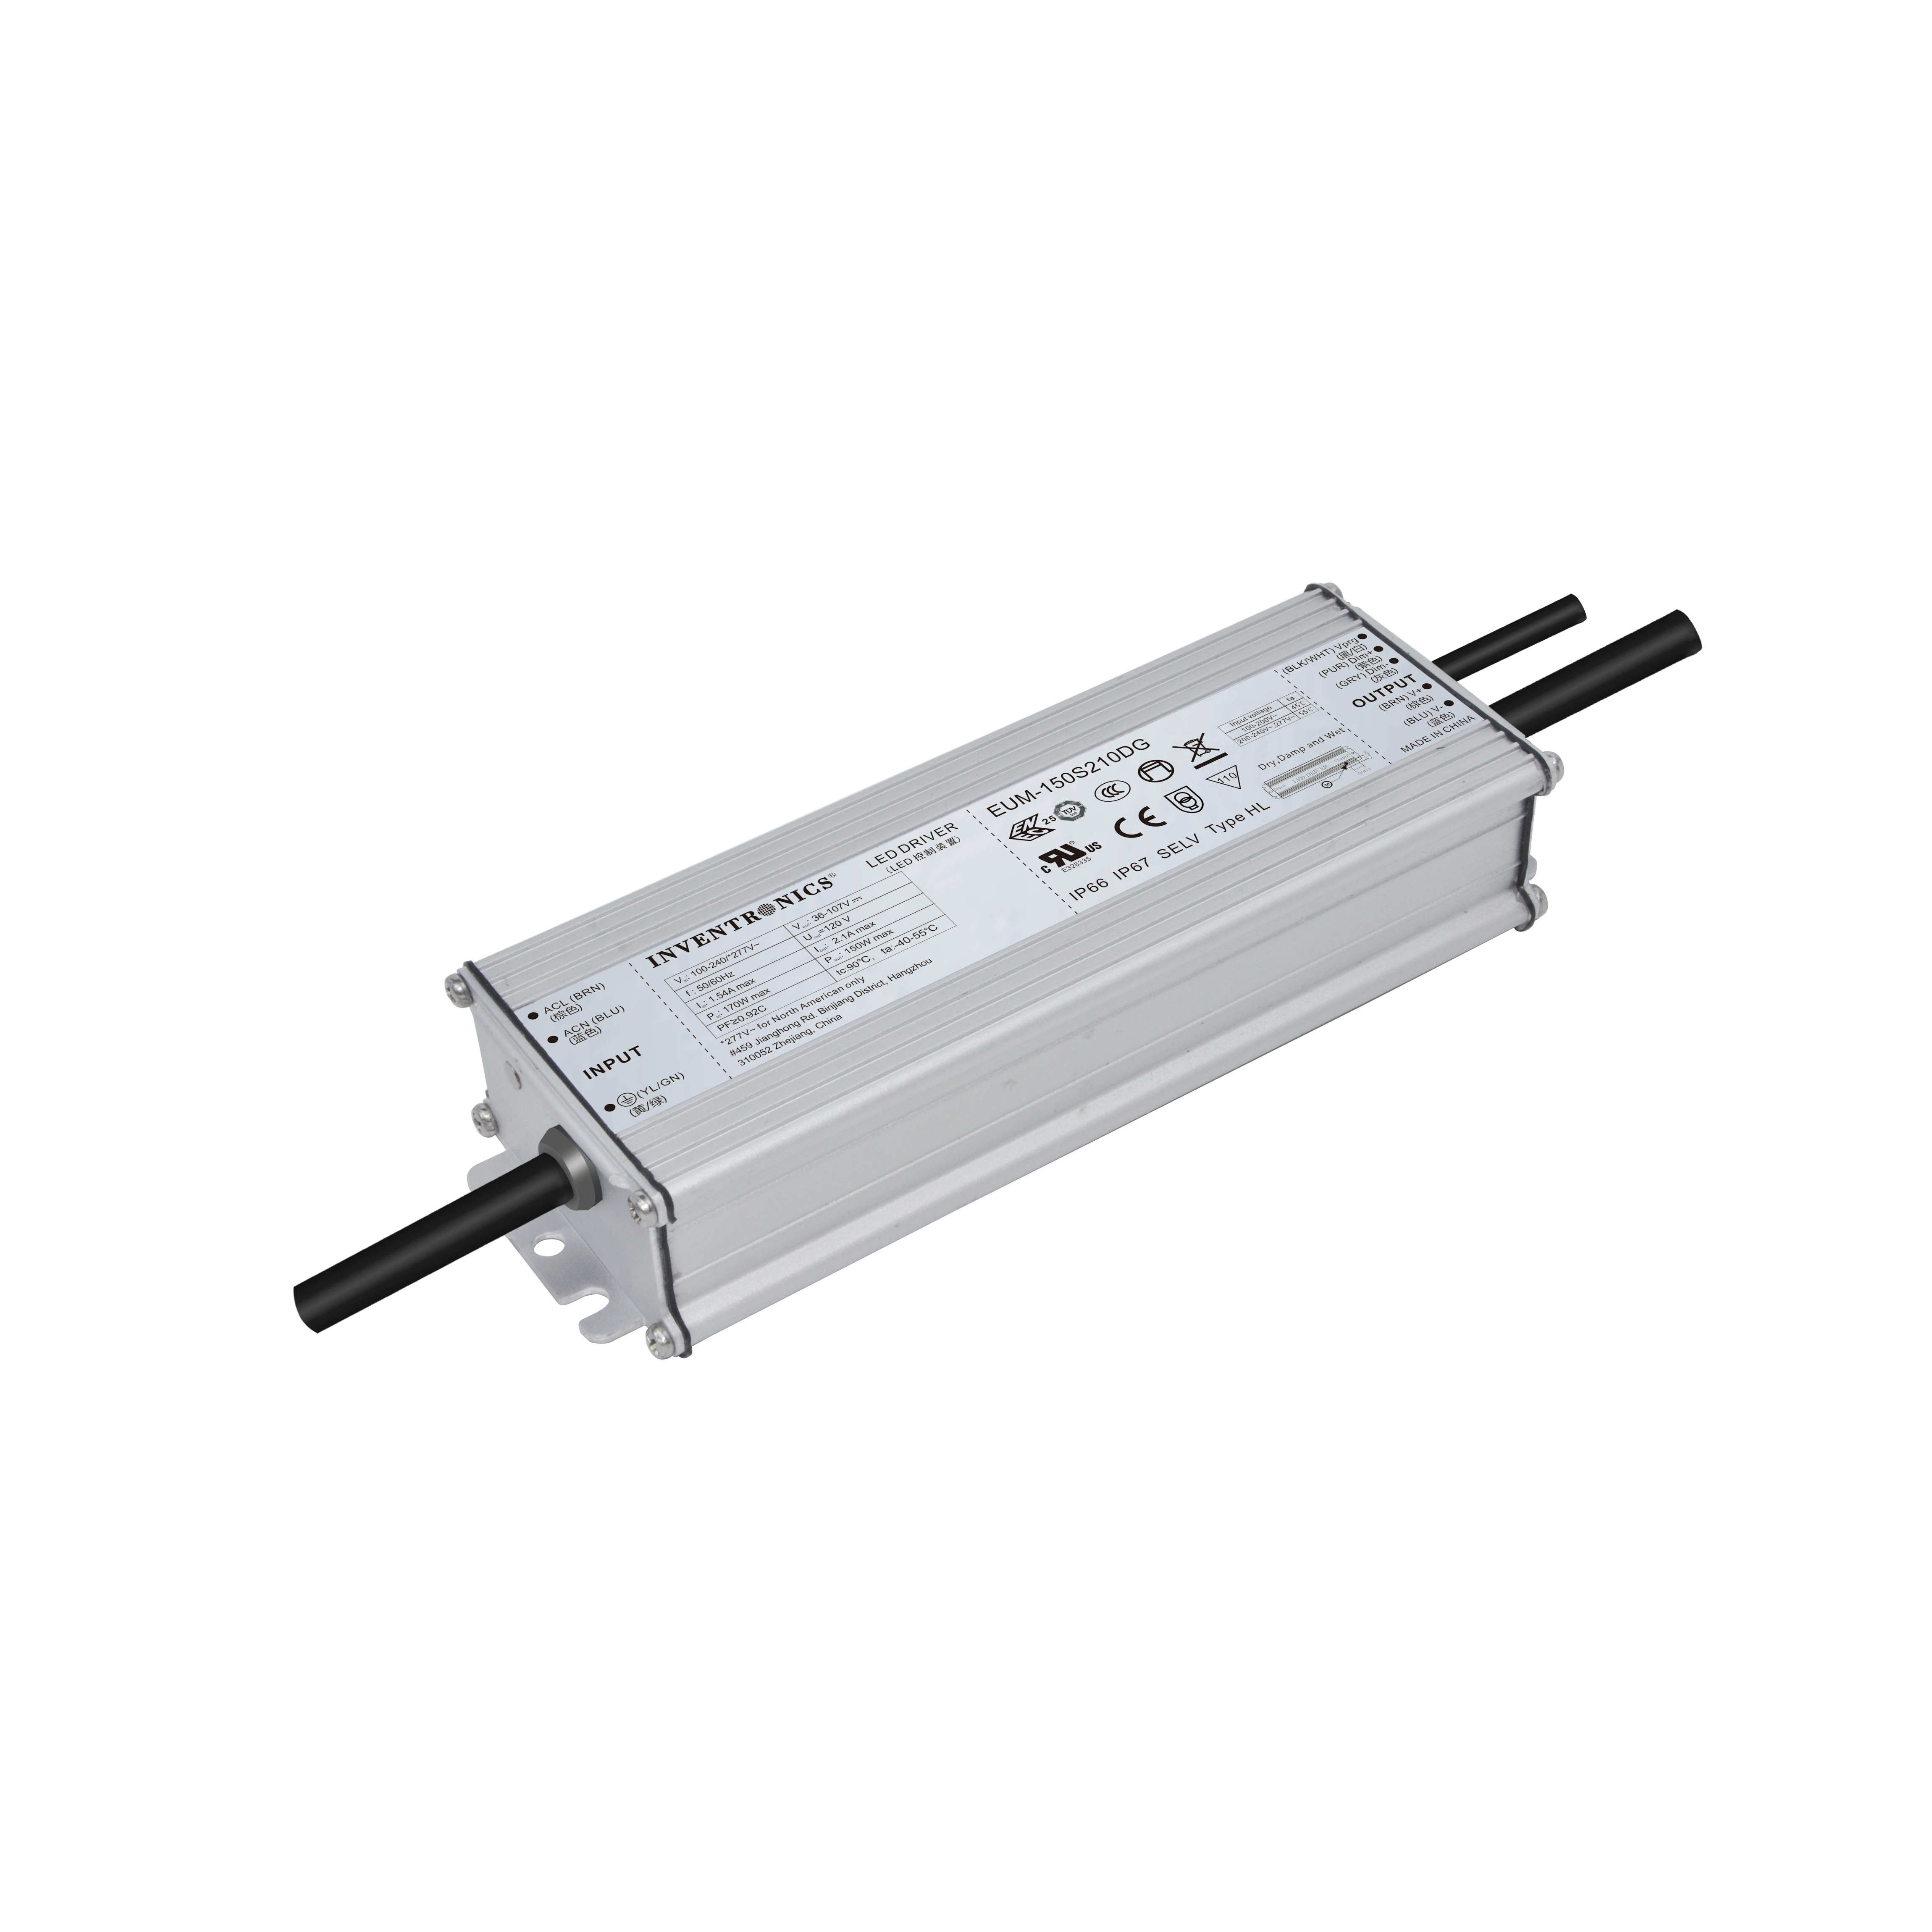 How to choose LED drivers for LED street light?